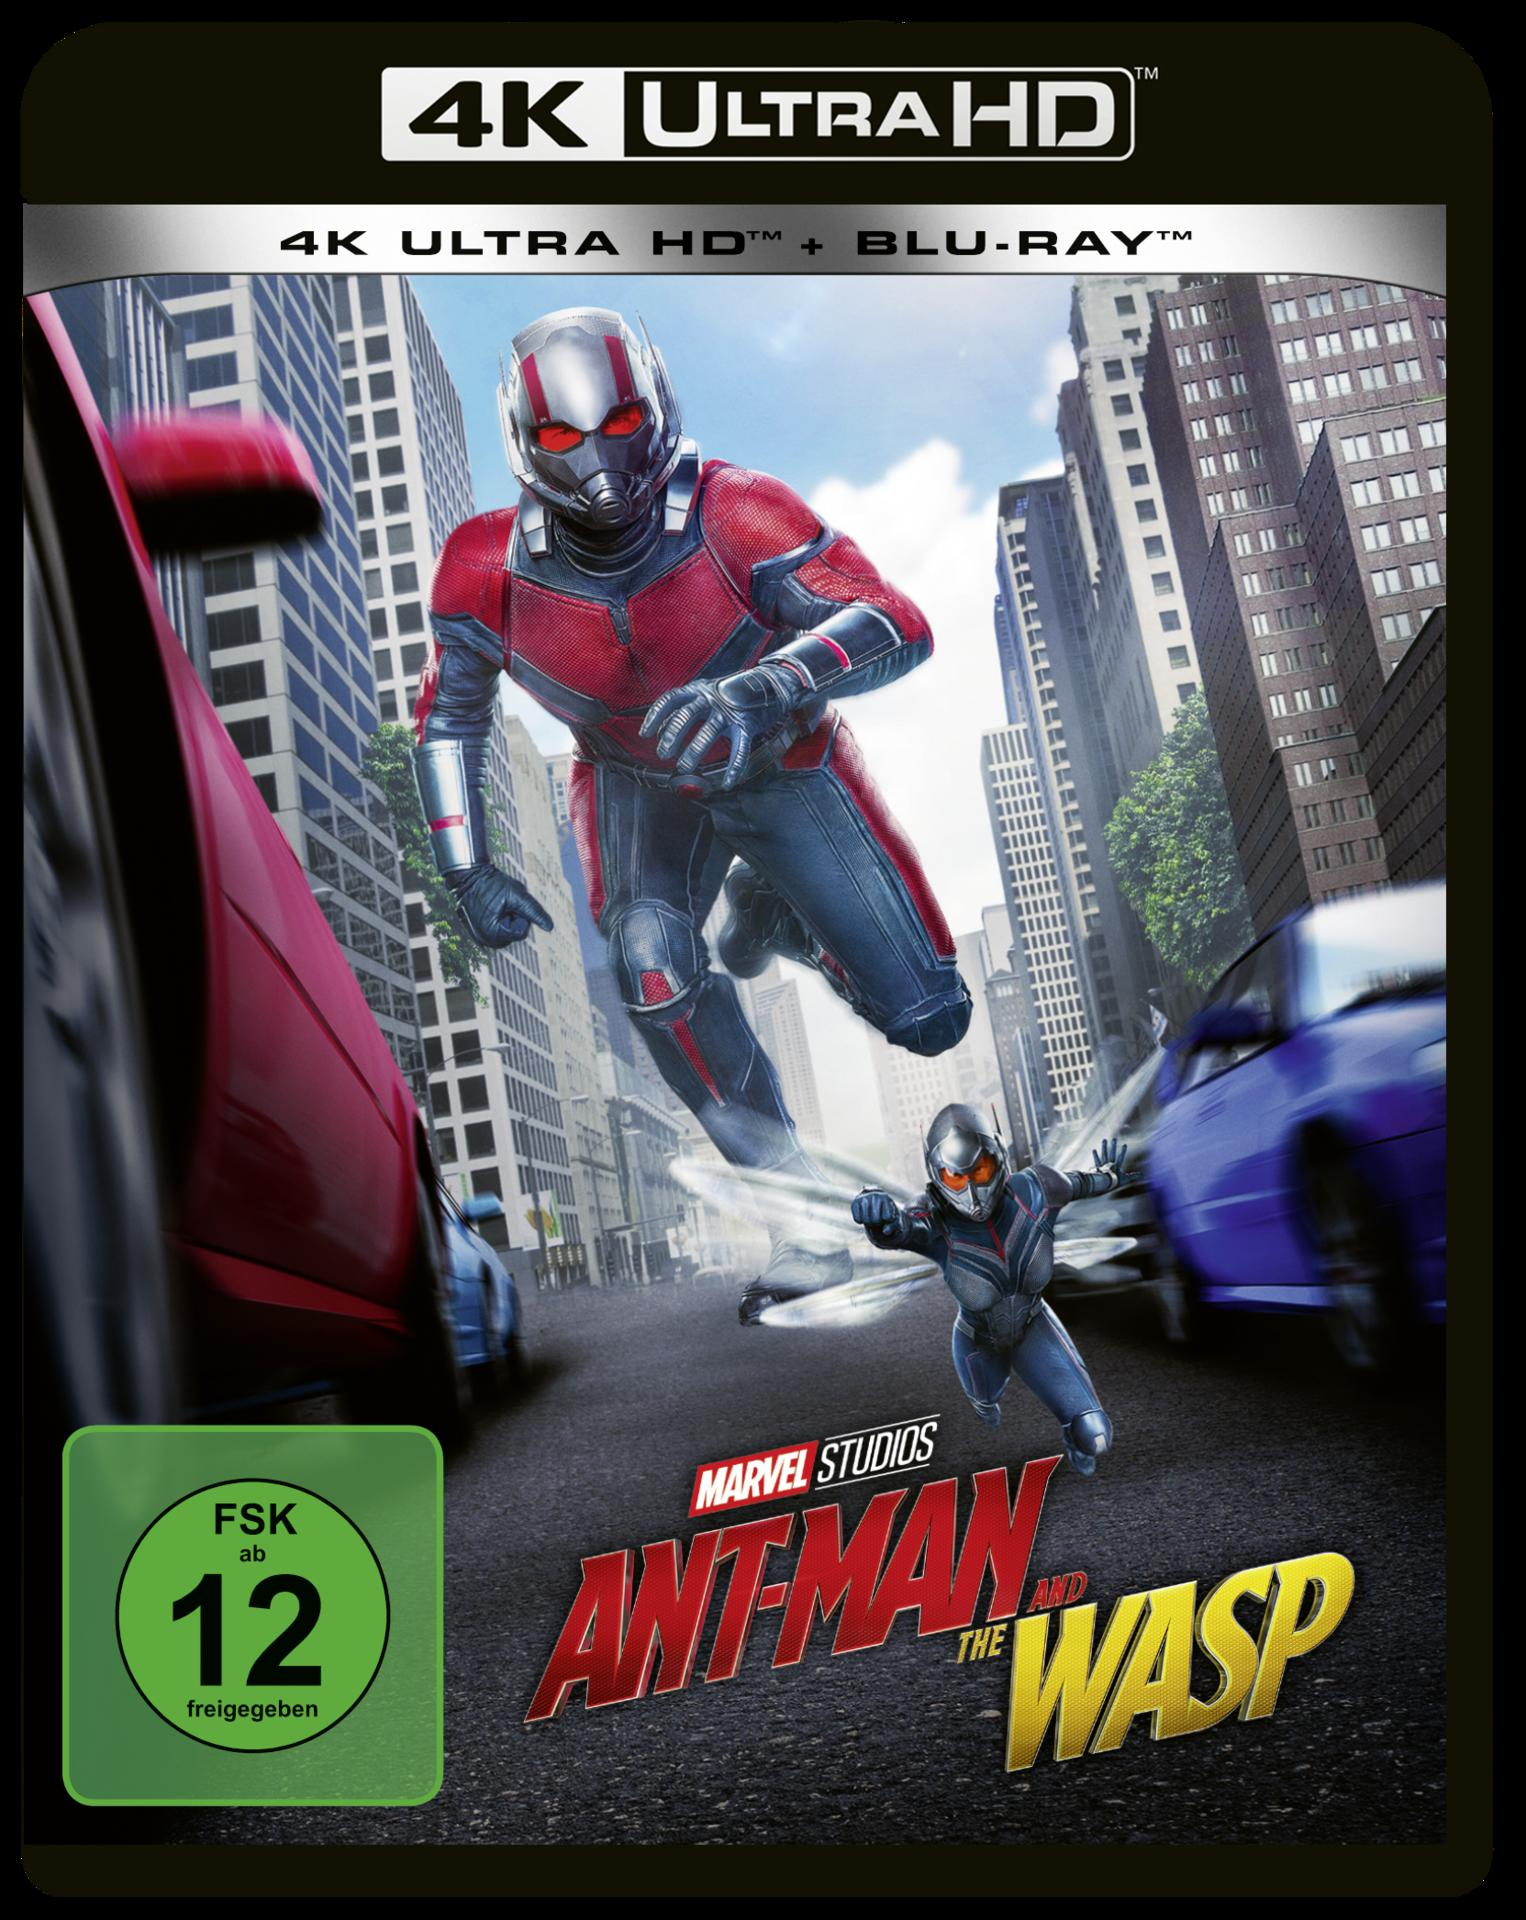 Ant-Man and + Blu-ray Blu-ray Ultra HD 4K Wasp the